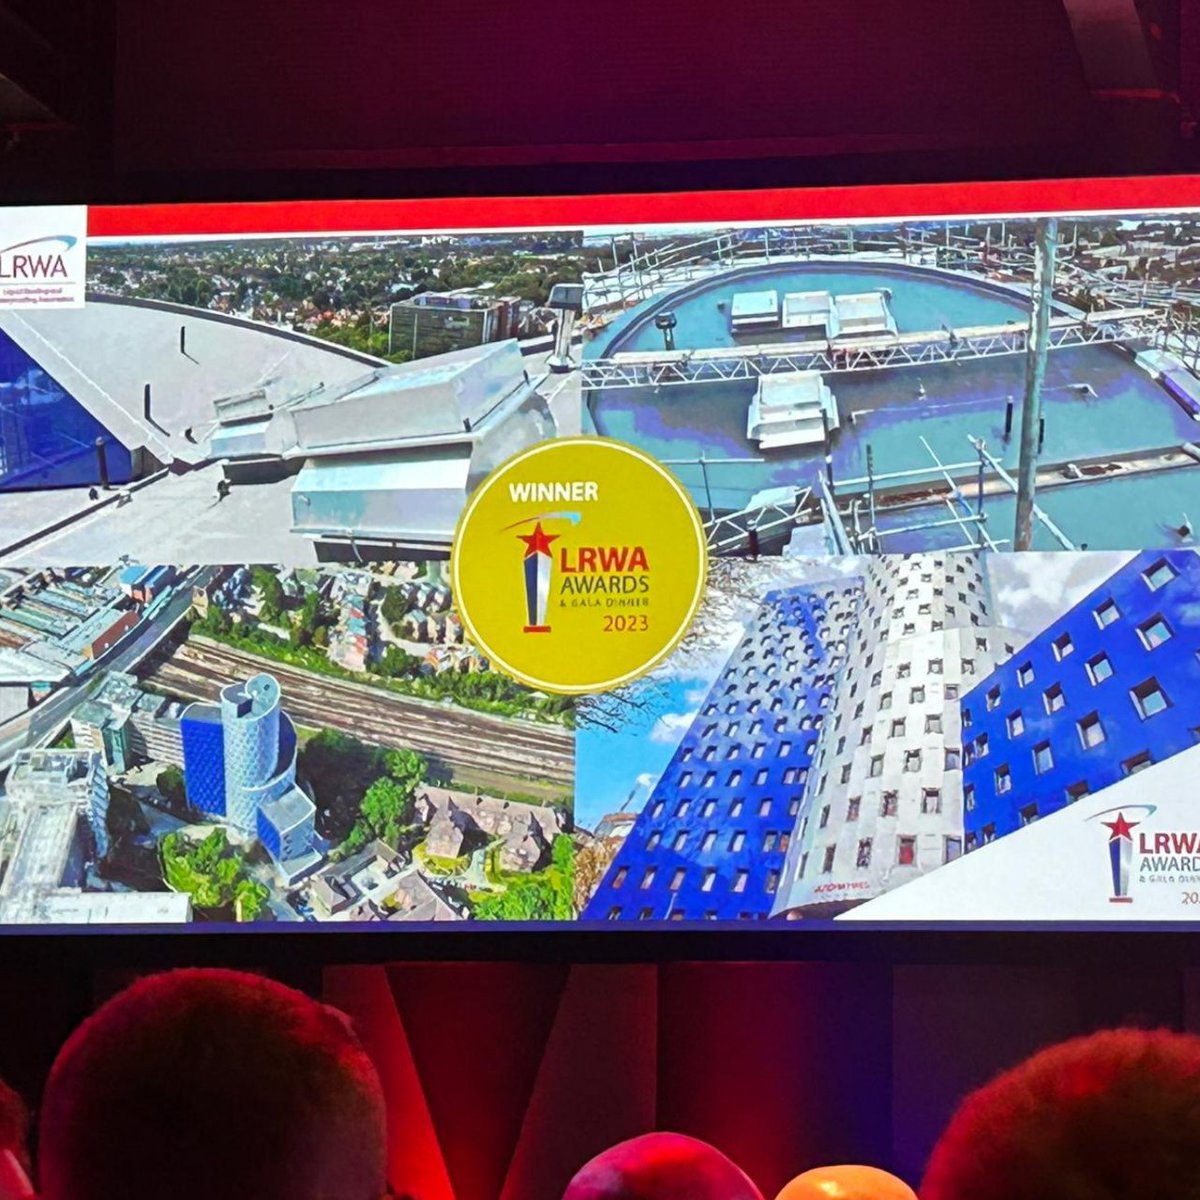 🏆LIQUID ROOFING PROJECT OF THE YEAR >1000㎡🏆

We are incredibly proud that Polyroof has been awarded ‘Liquid Roofing Project Of The Year >1000㎡ with Tower Asphalt for Host Helix Student Accommodation! 

Let the celebrations begin 🤩

#LRWAawards2023 #Winners #Polyroof #Roofing